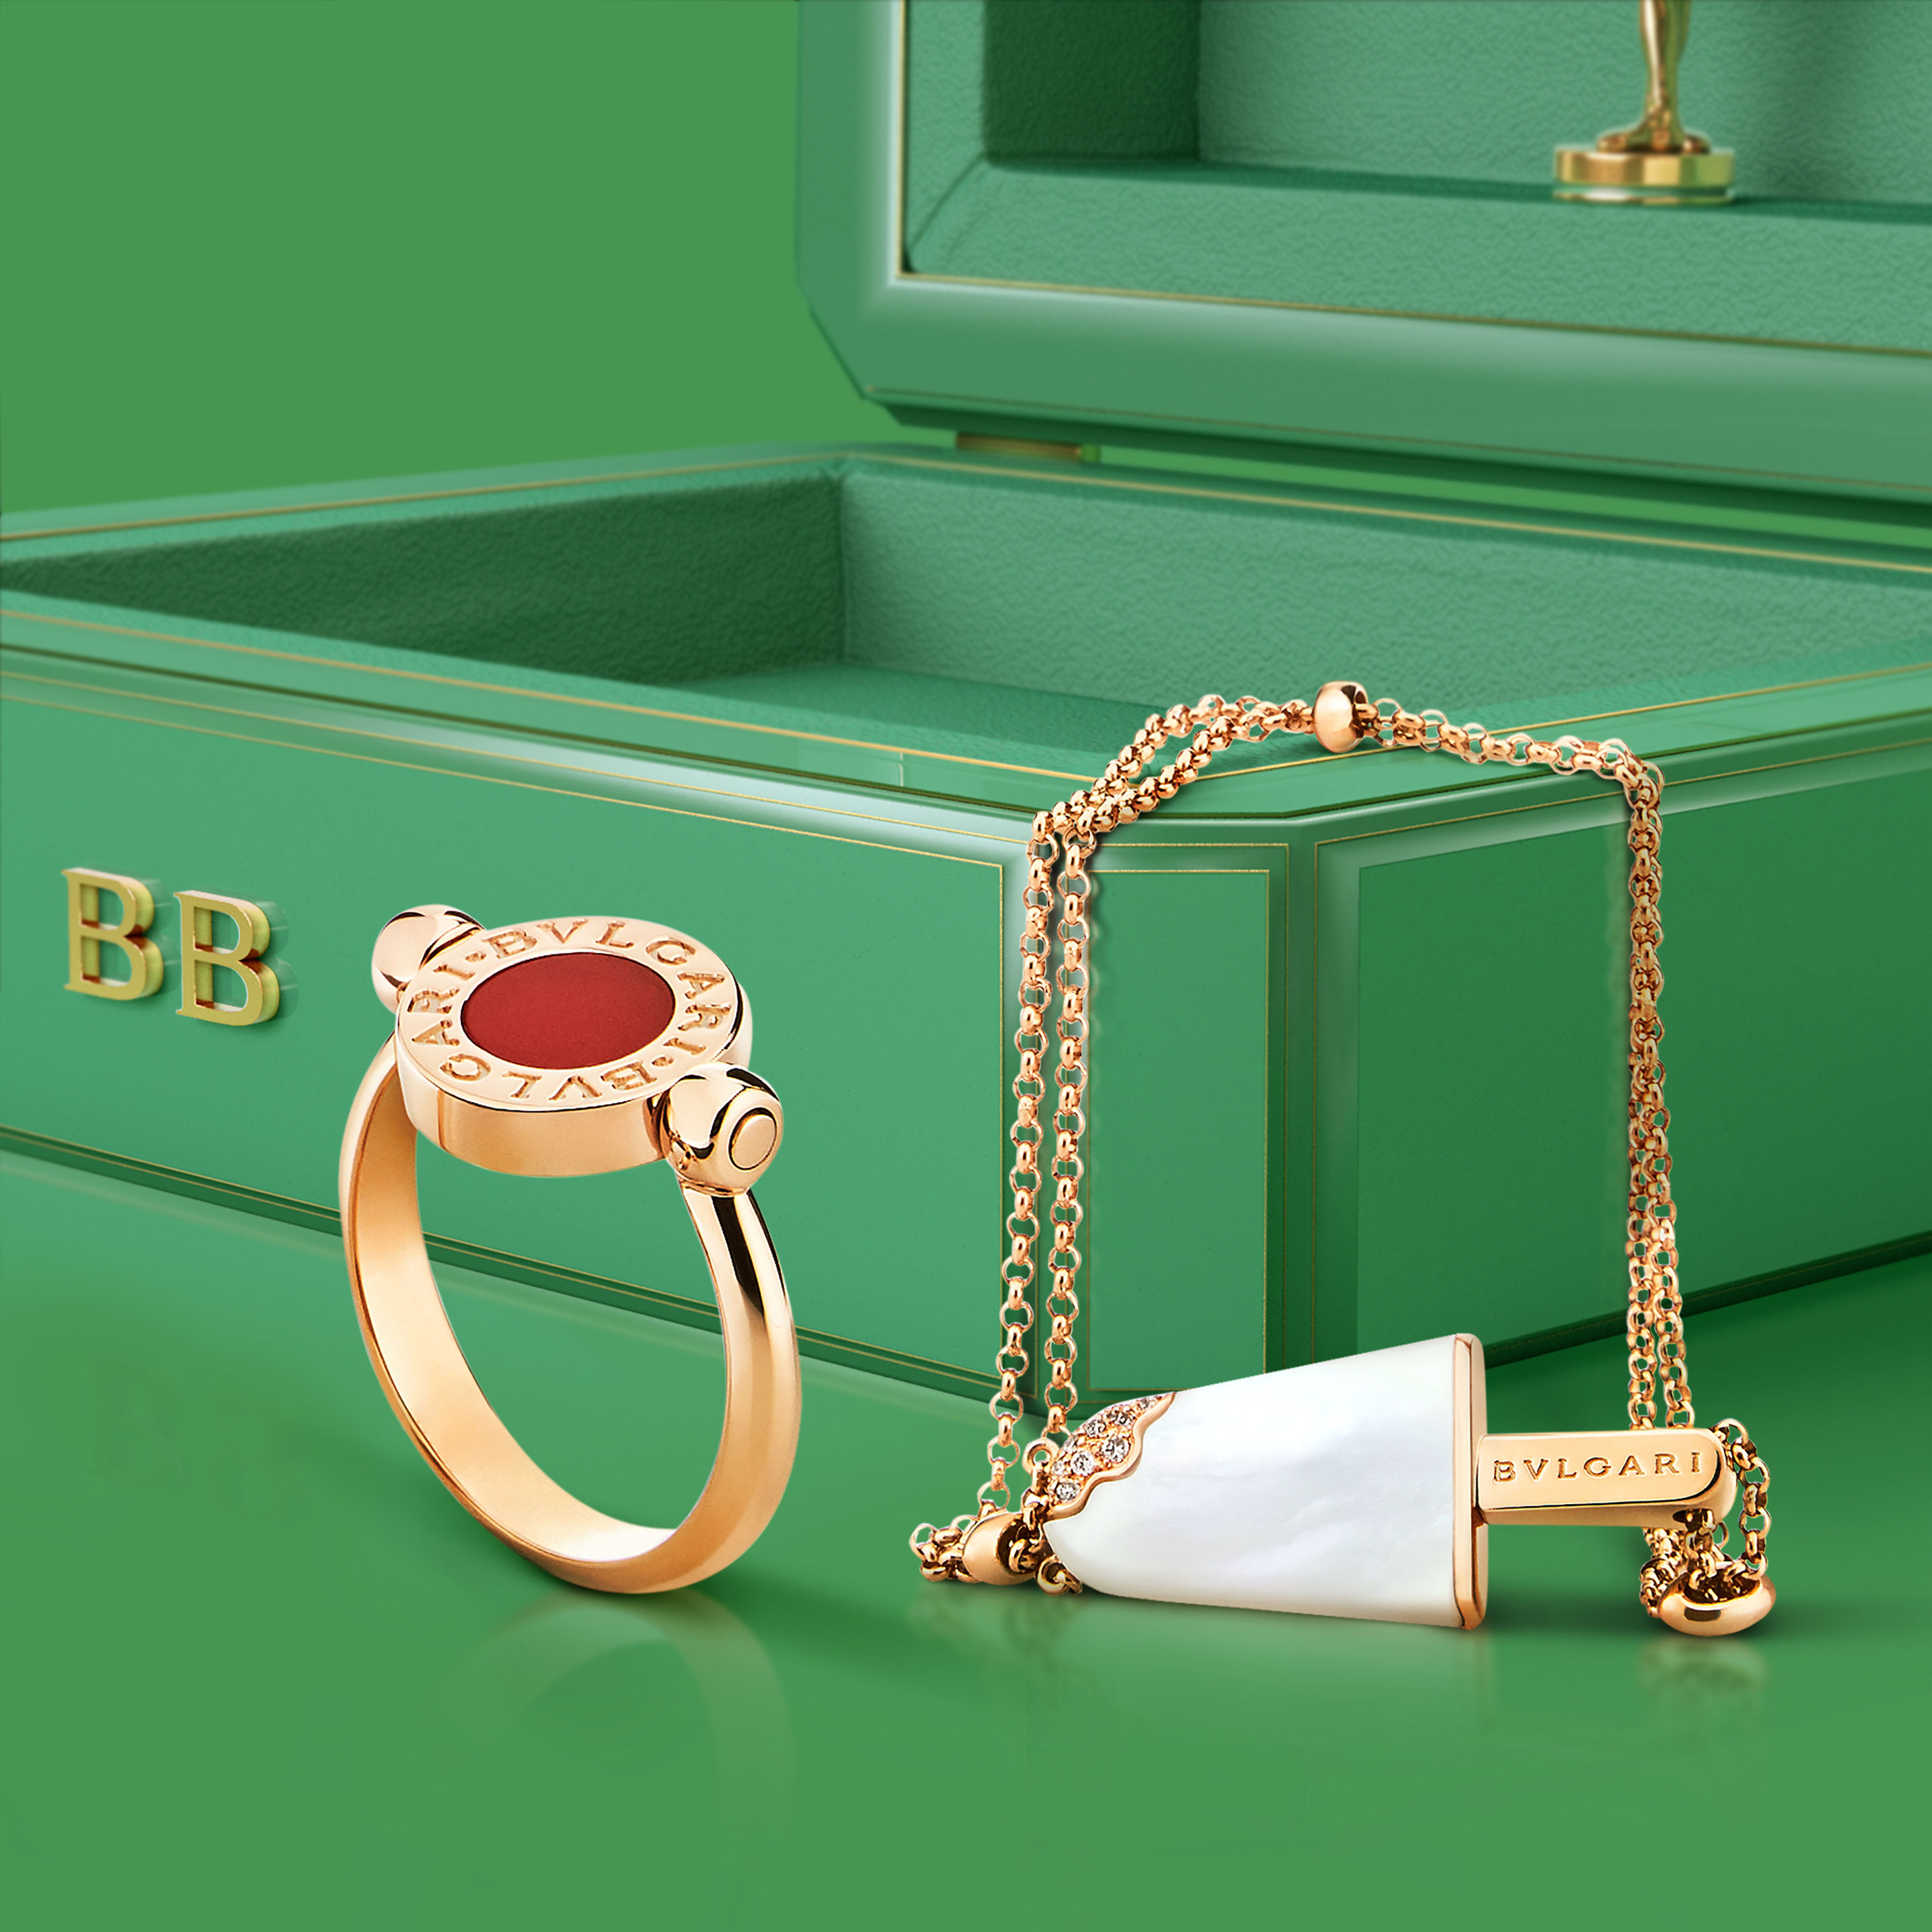 BVLGARI-BVLGARI 2018 brings a pop of colour to the iconic collection